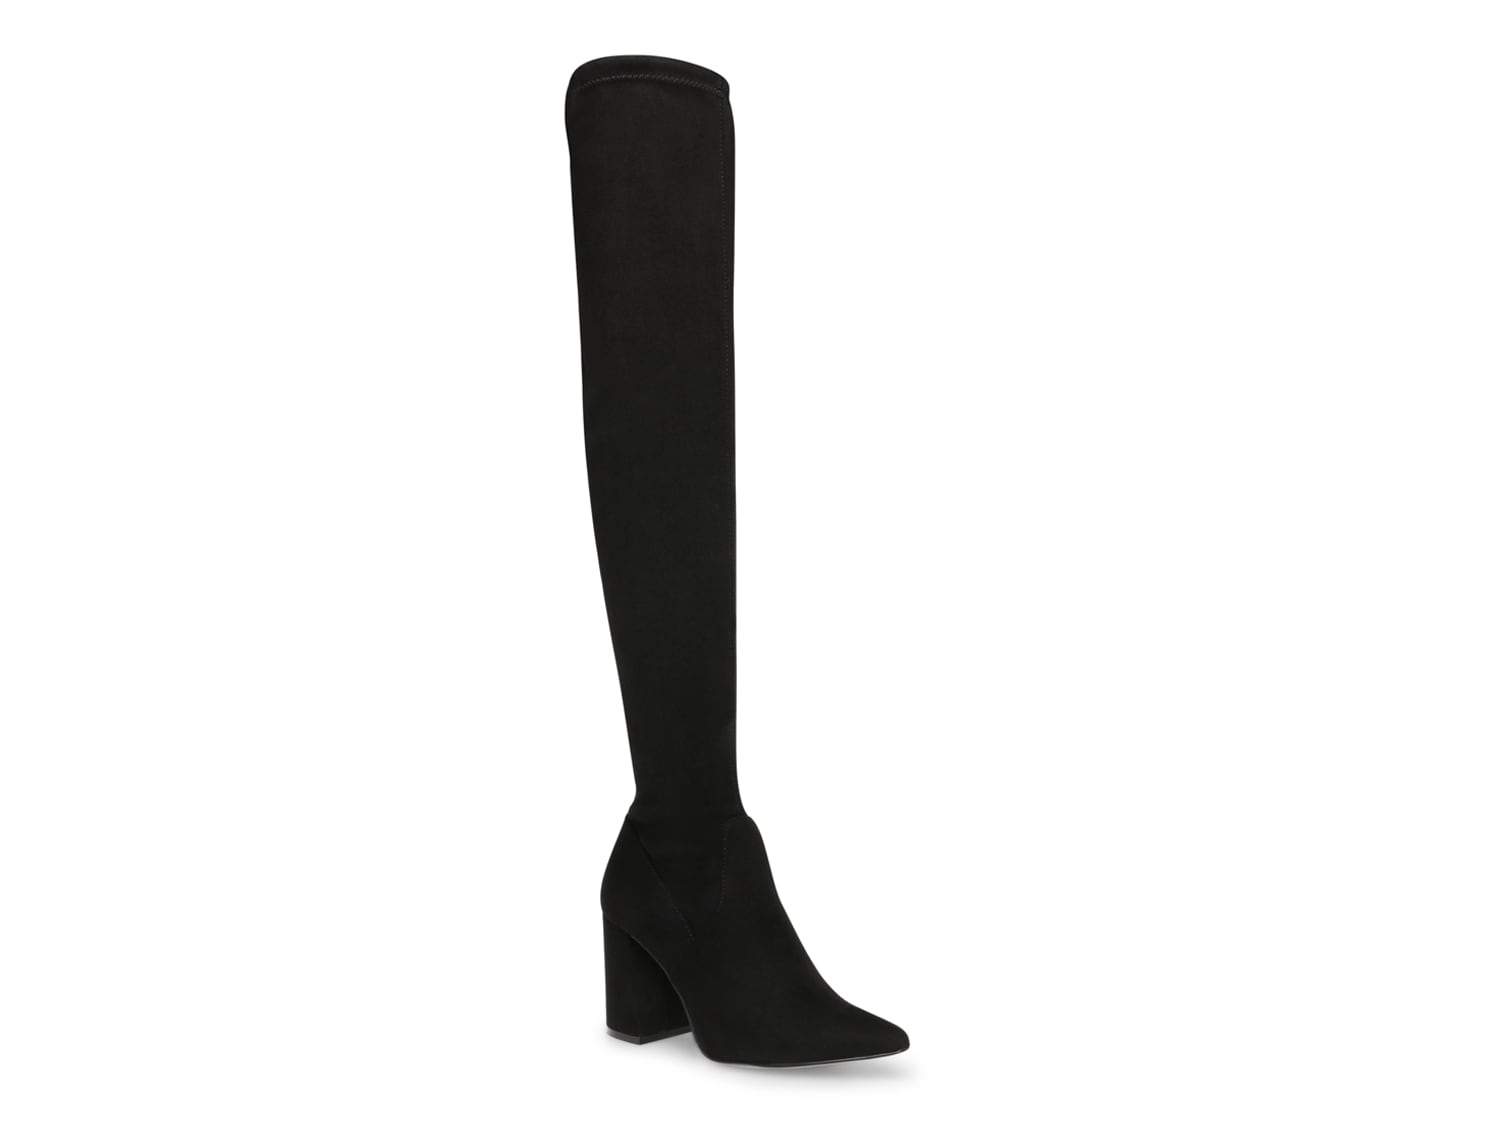 Steve Madden Jacoby Over-the-Knee Boot - Free Shipping | DSW